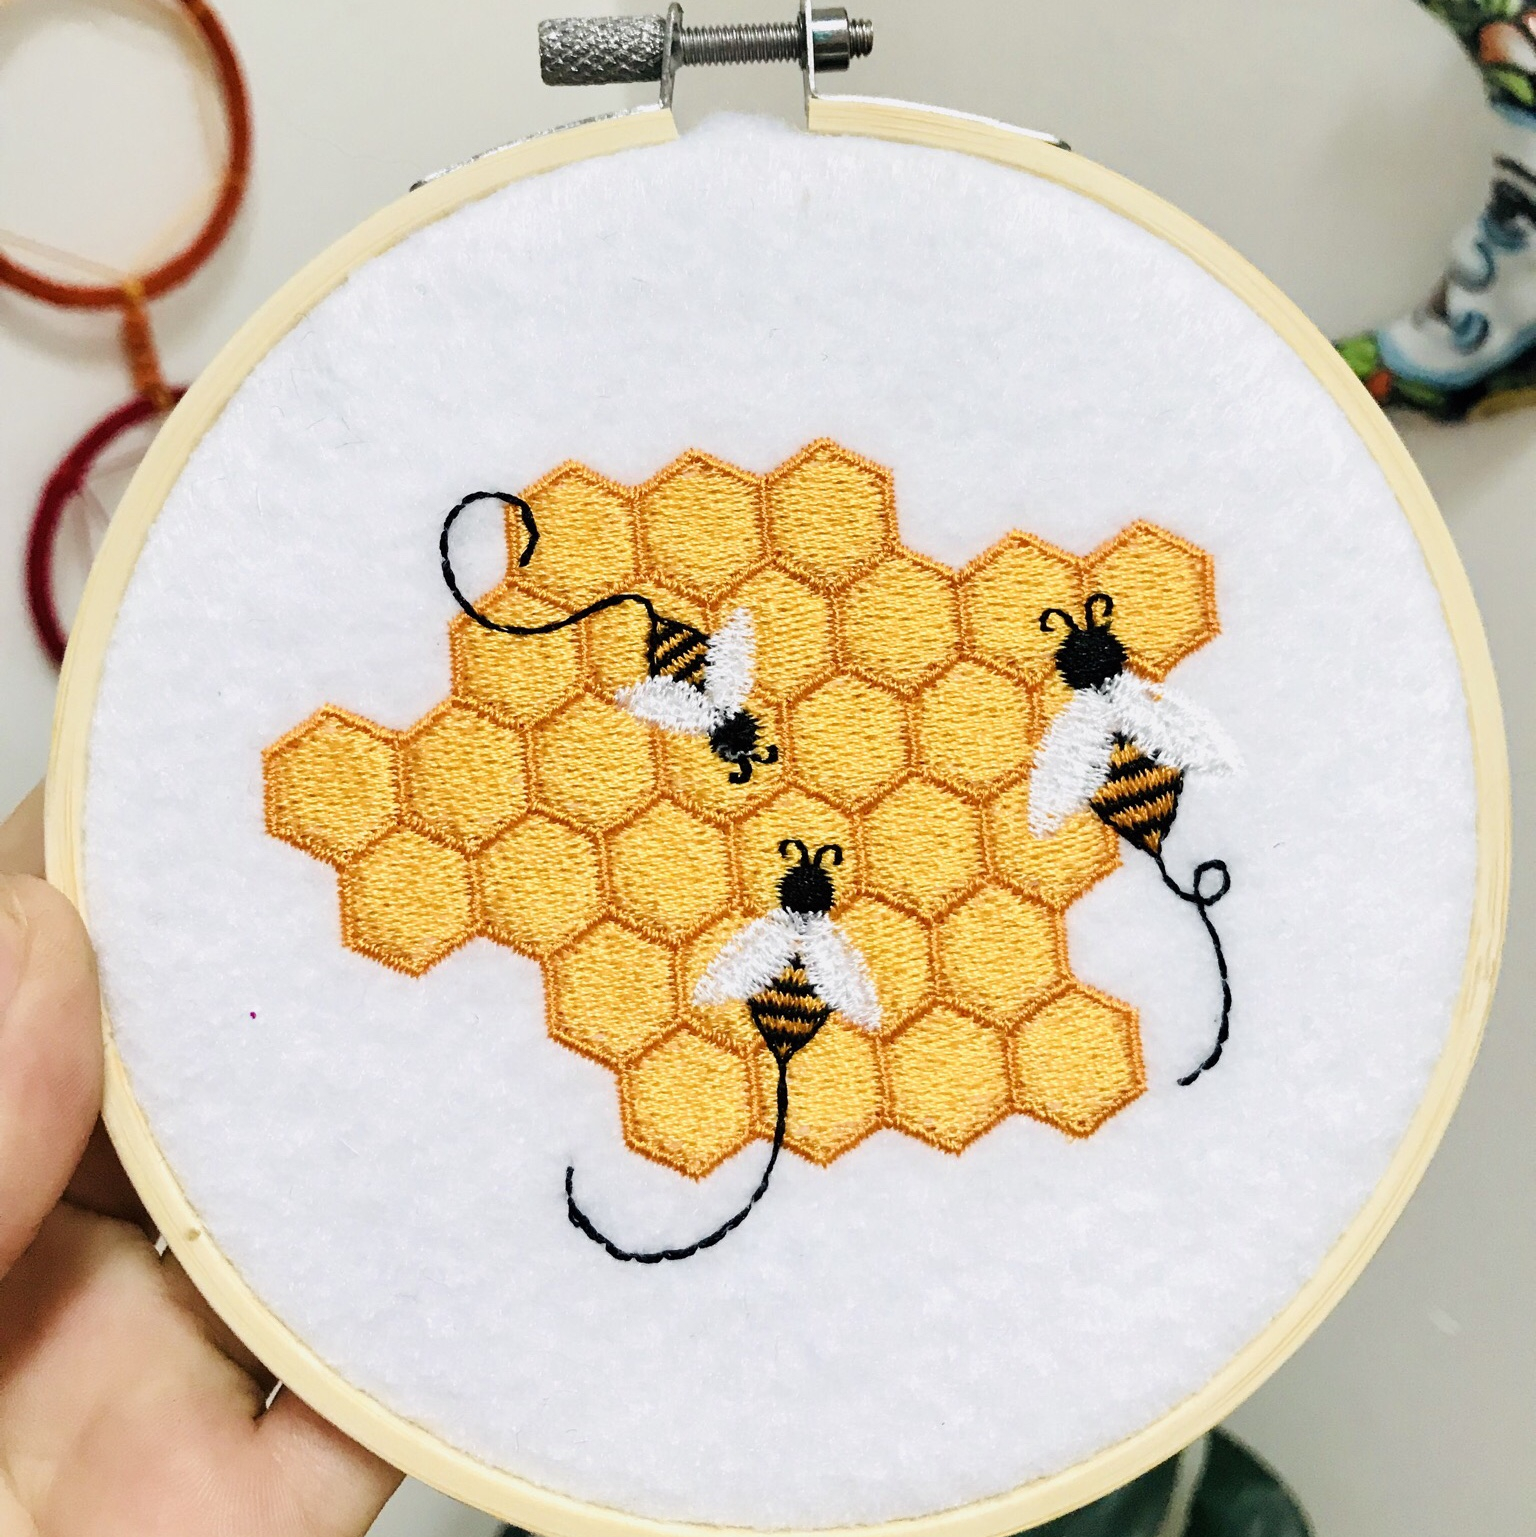 Bumble Bee Embroidery Pattern Honeycomb Machine Embroidery Features Bumble Bees Depop